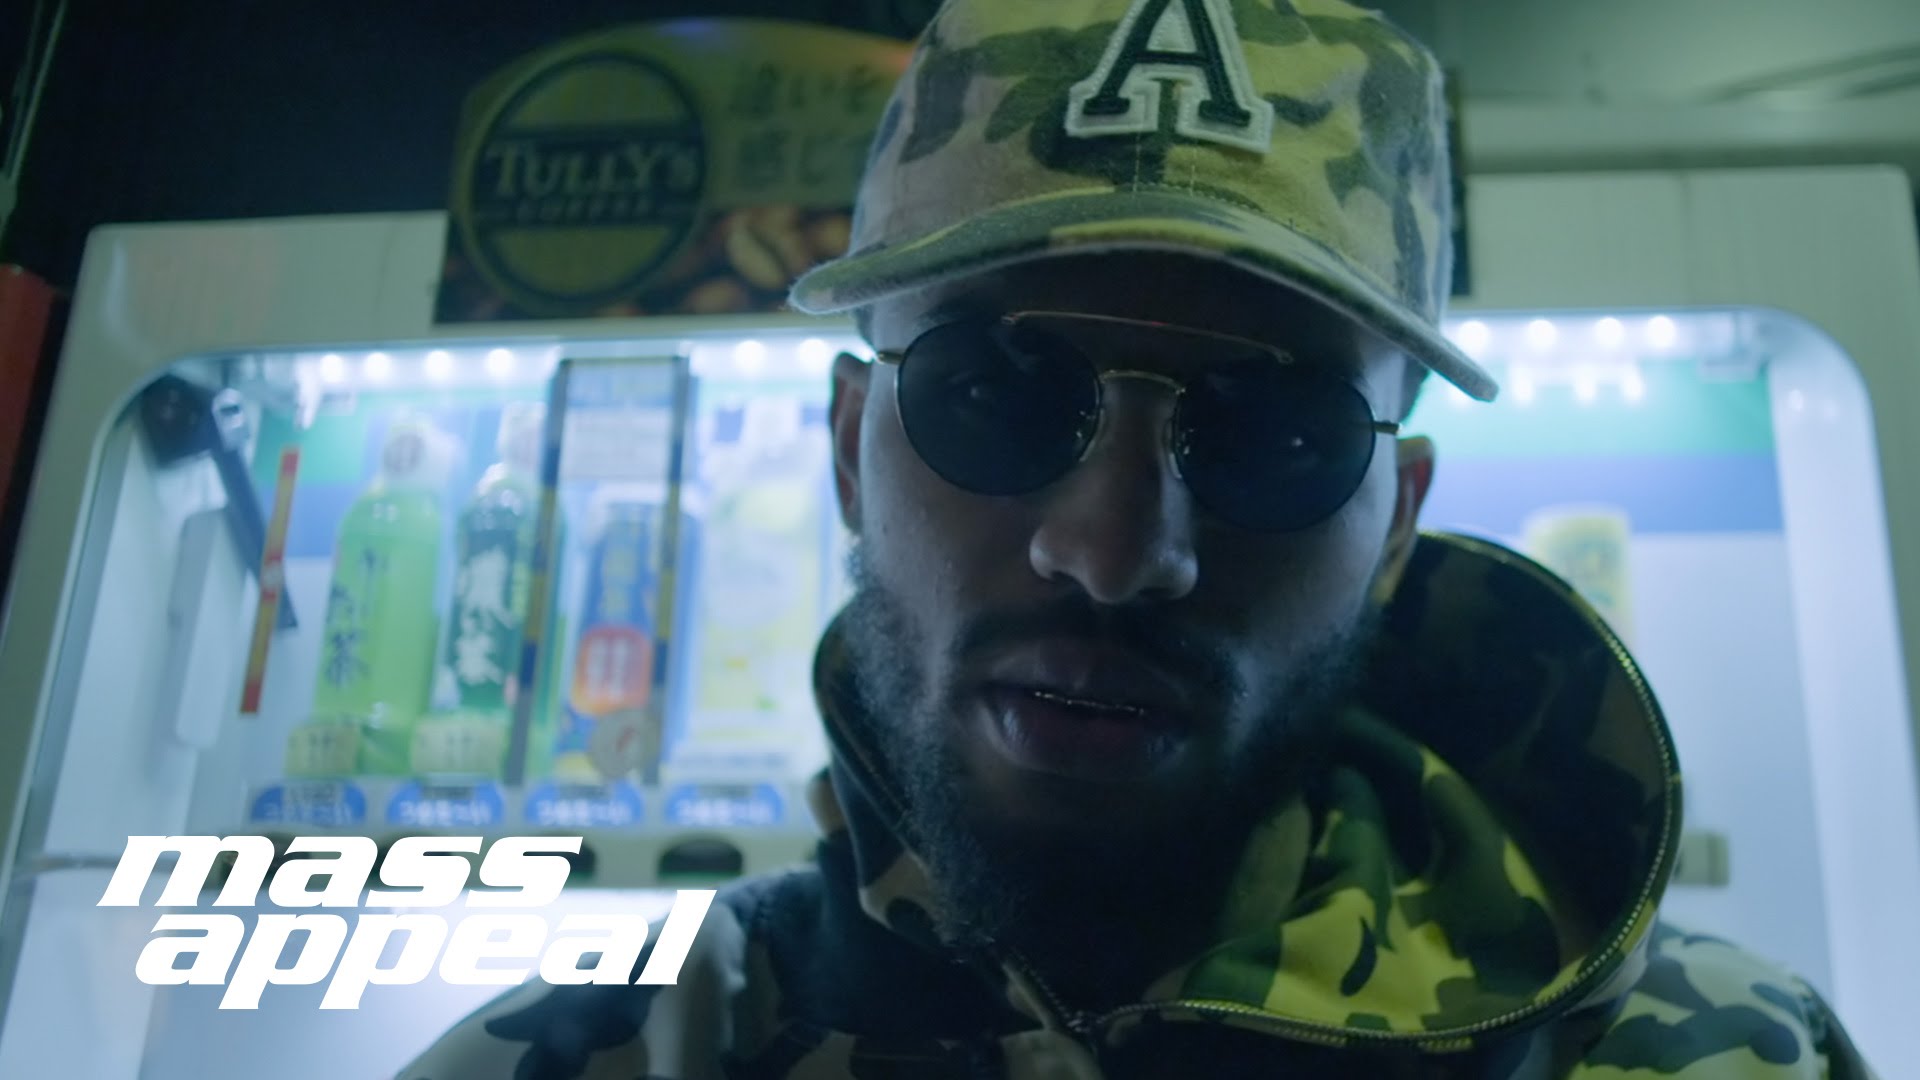 Dave East – “It’s Time” (Video)